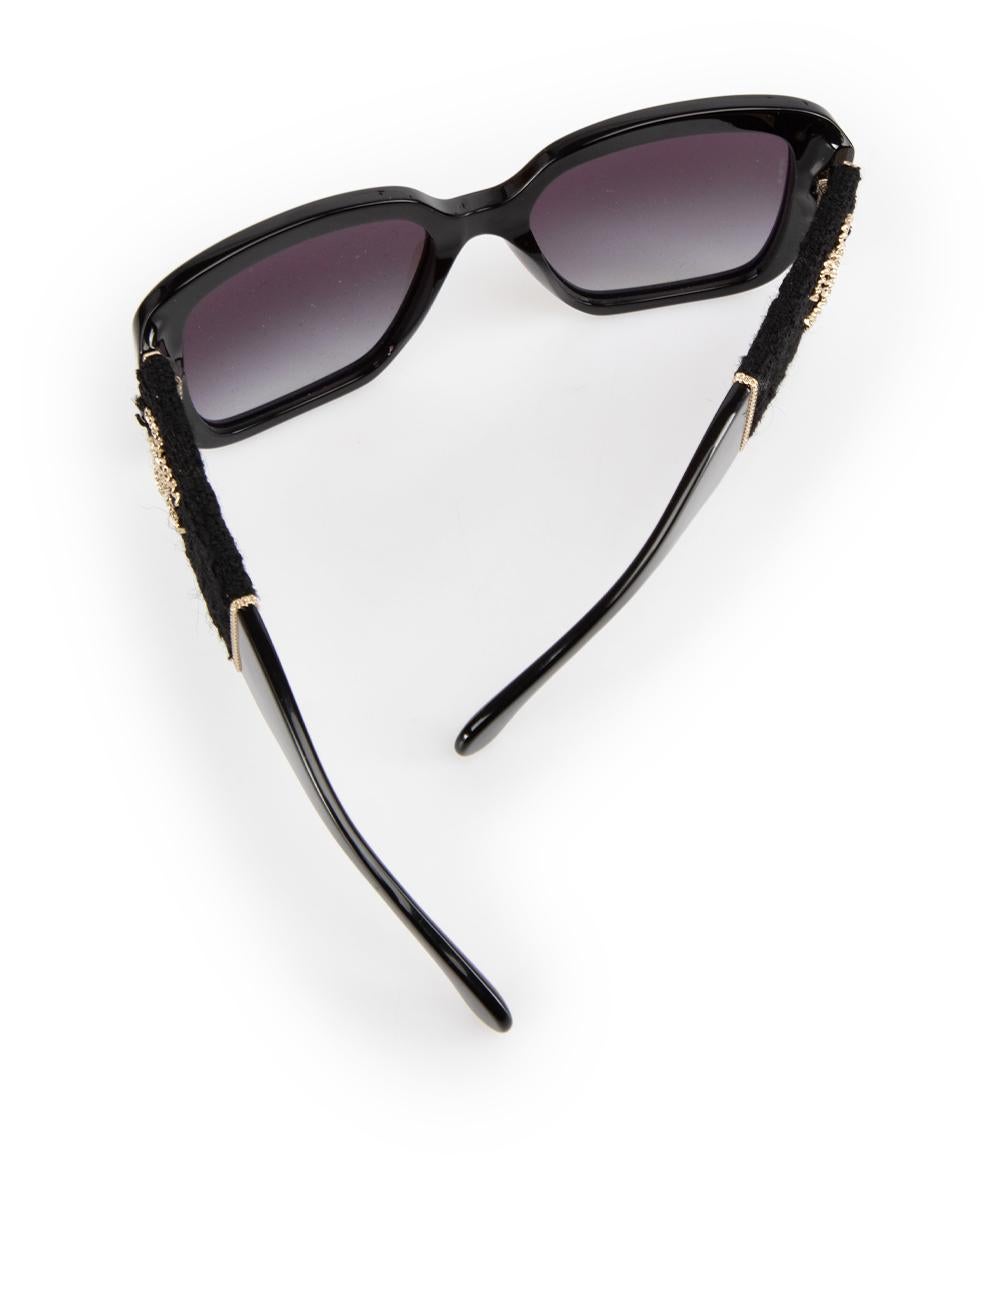 Chanel Black Square Tweed Arms Sunglasses 3